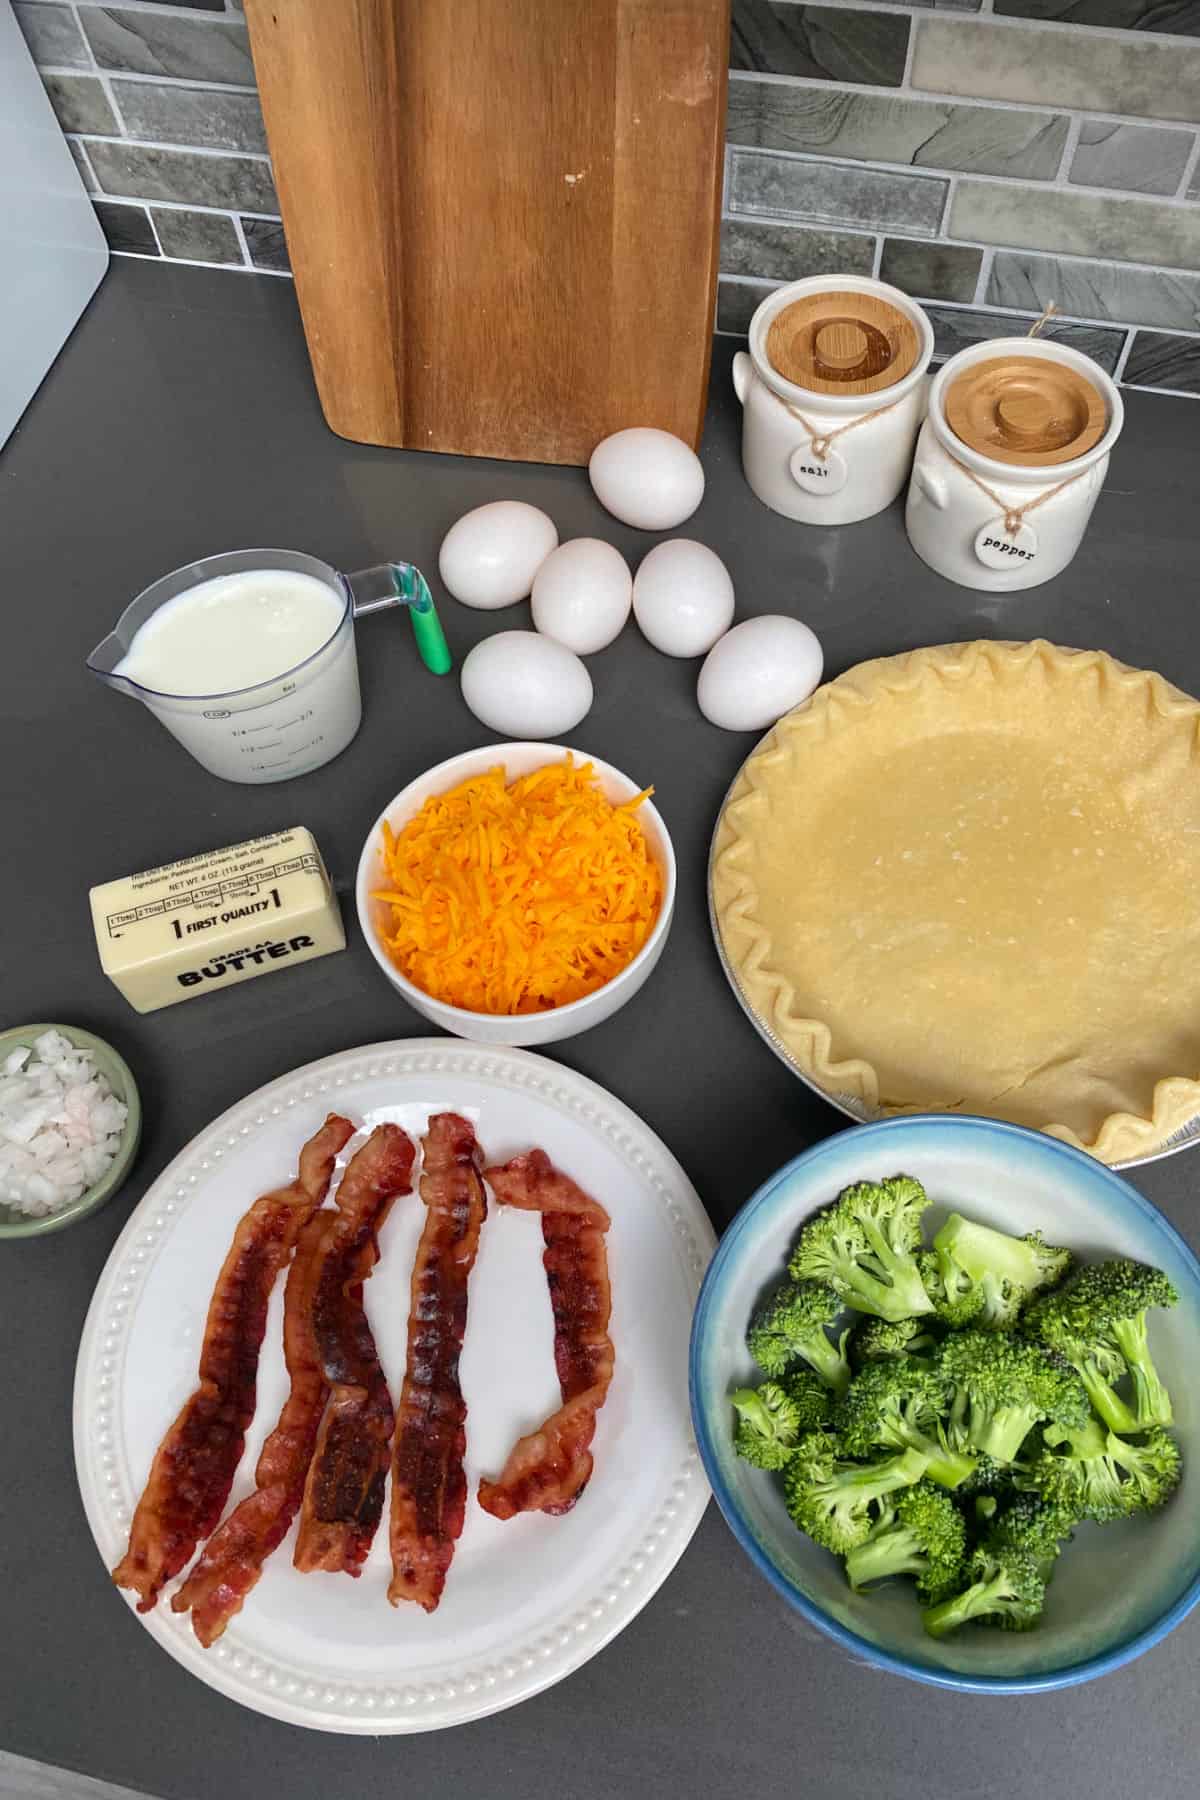 Bacon Broccoli Quiche Ingredients on couner.